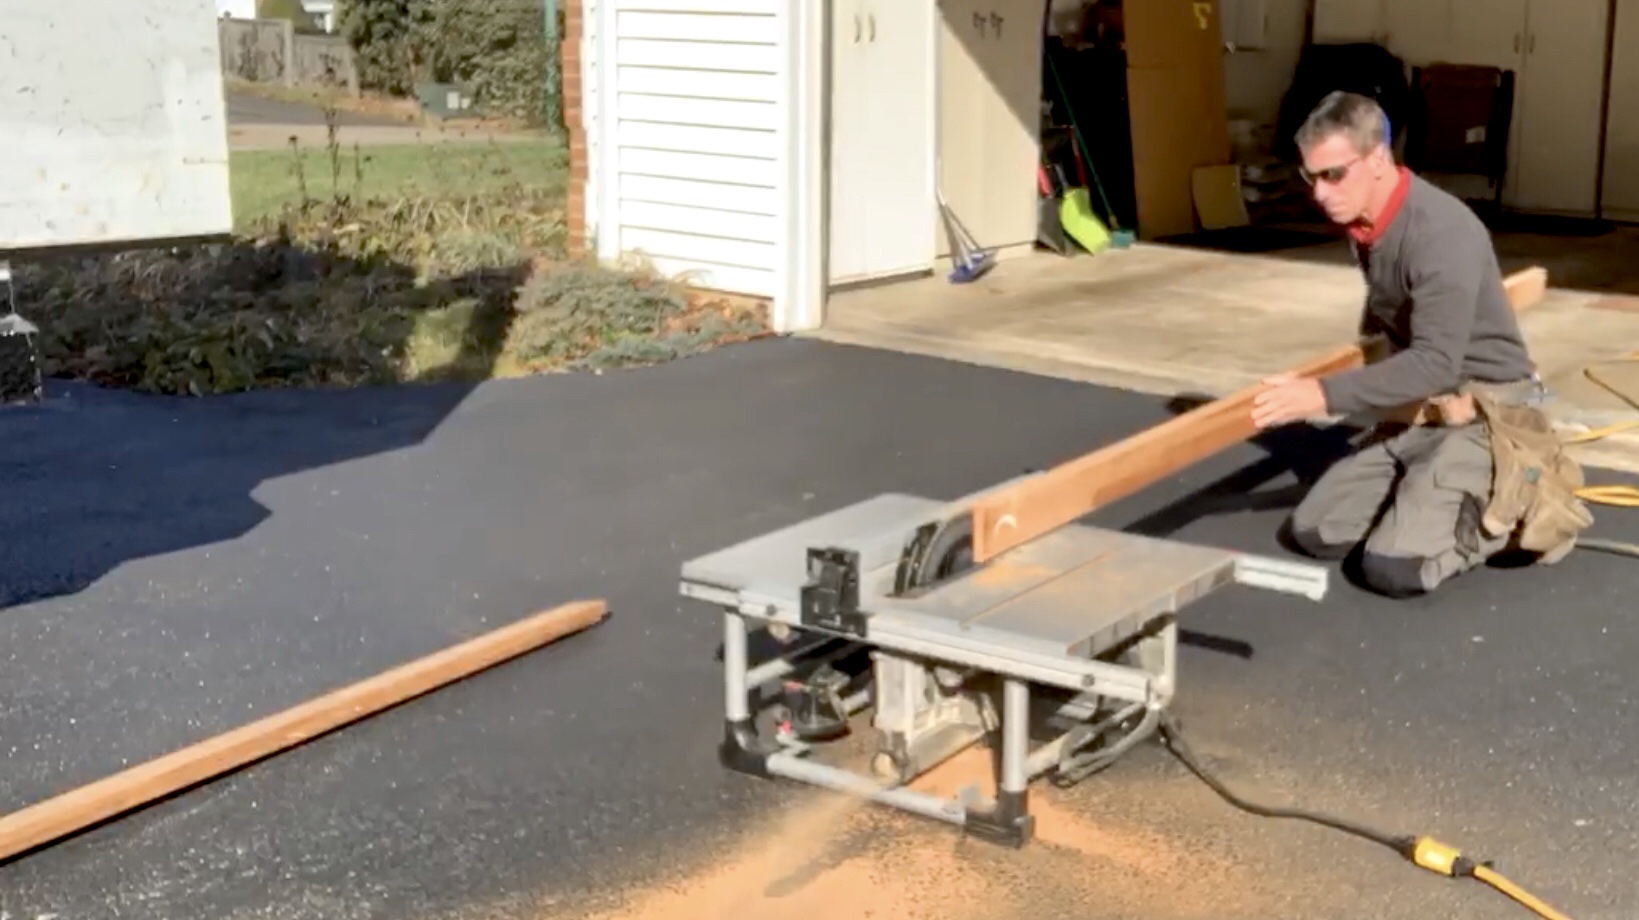 MyFixitUpLife Mark Tool Review SKILSAW Table saw